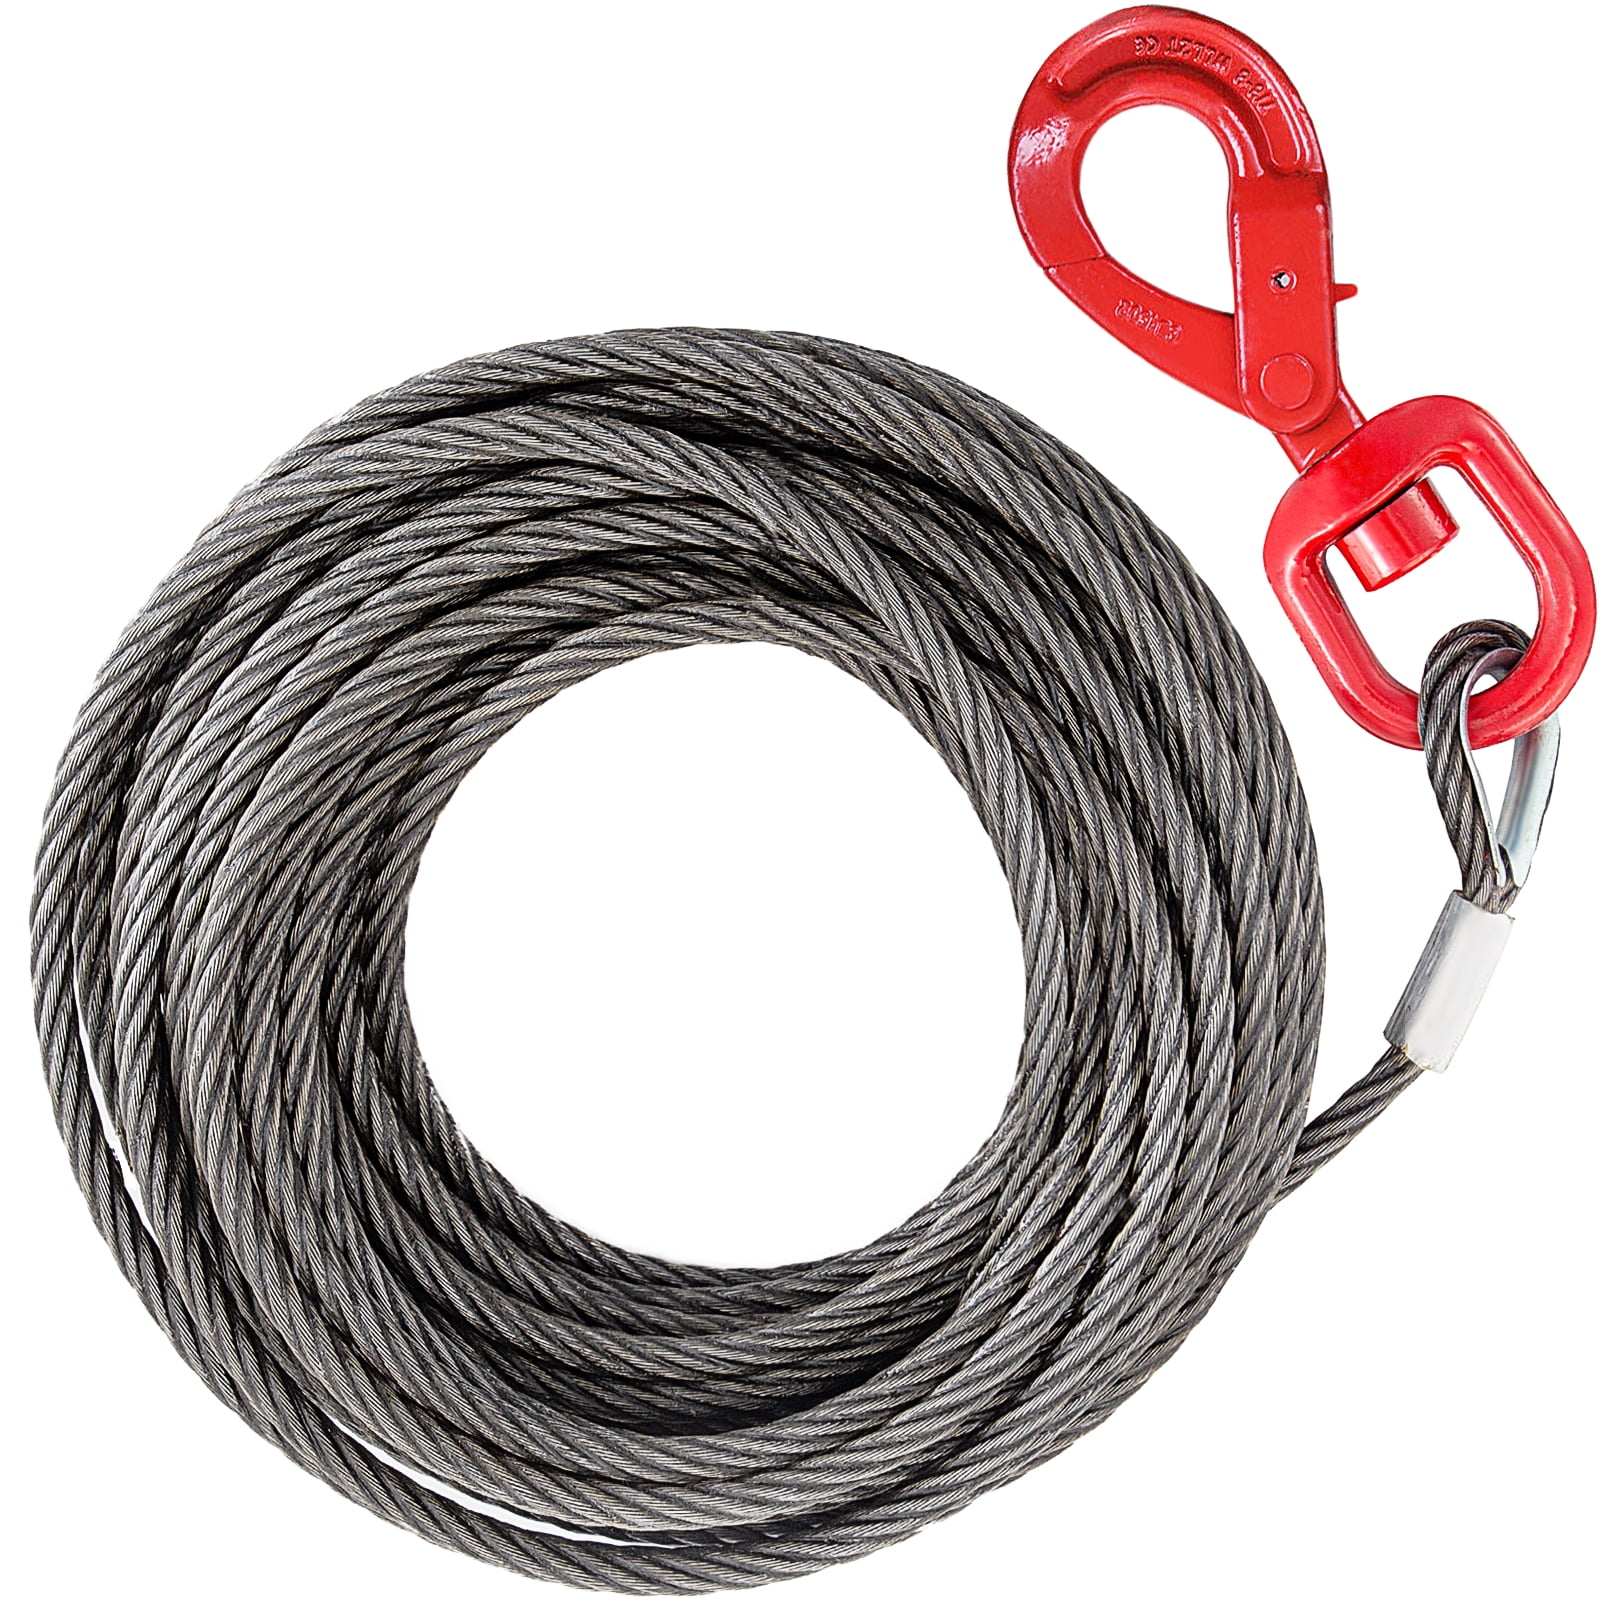 Crane Wire Rope with Hook for Rollback Wrecker 8800 Lbs Breaking Strength BestEquip Galvanized Steel Winch Cable 6x19 Strand Core Towing Cable Heavy Duty Tow Truck 3/8 x 50 